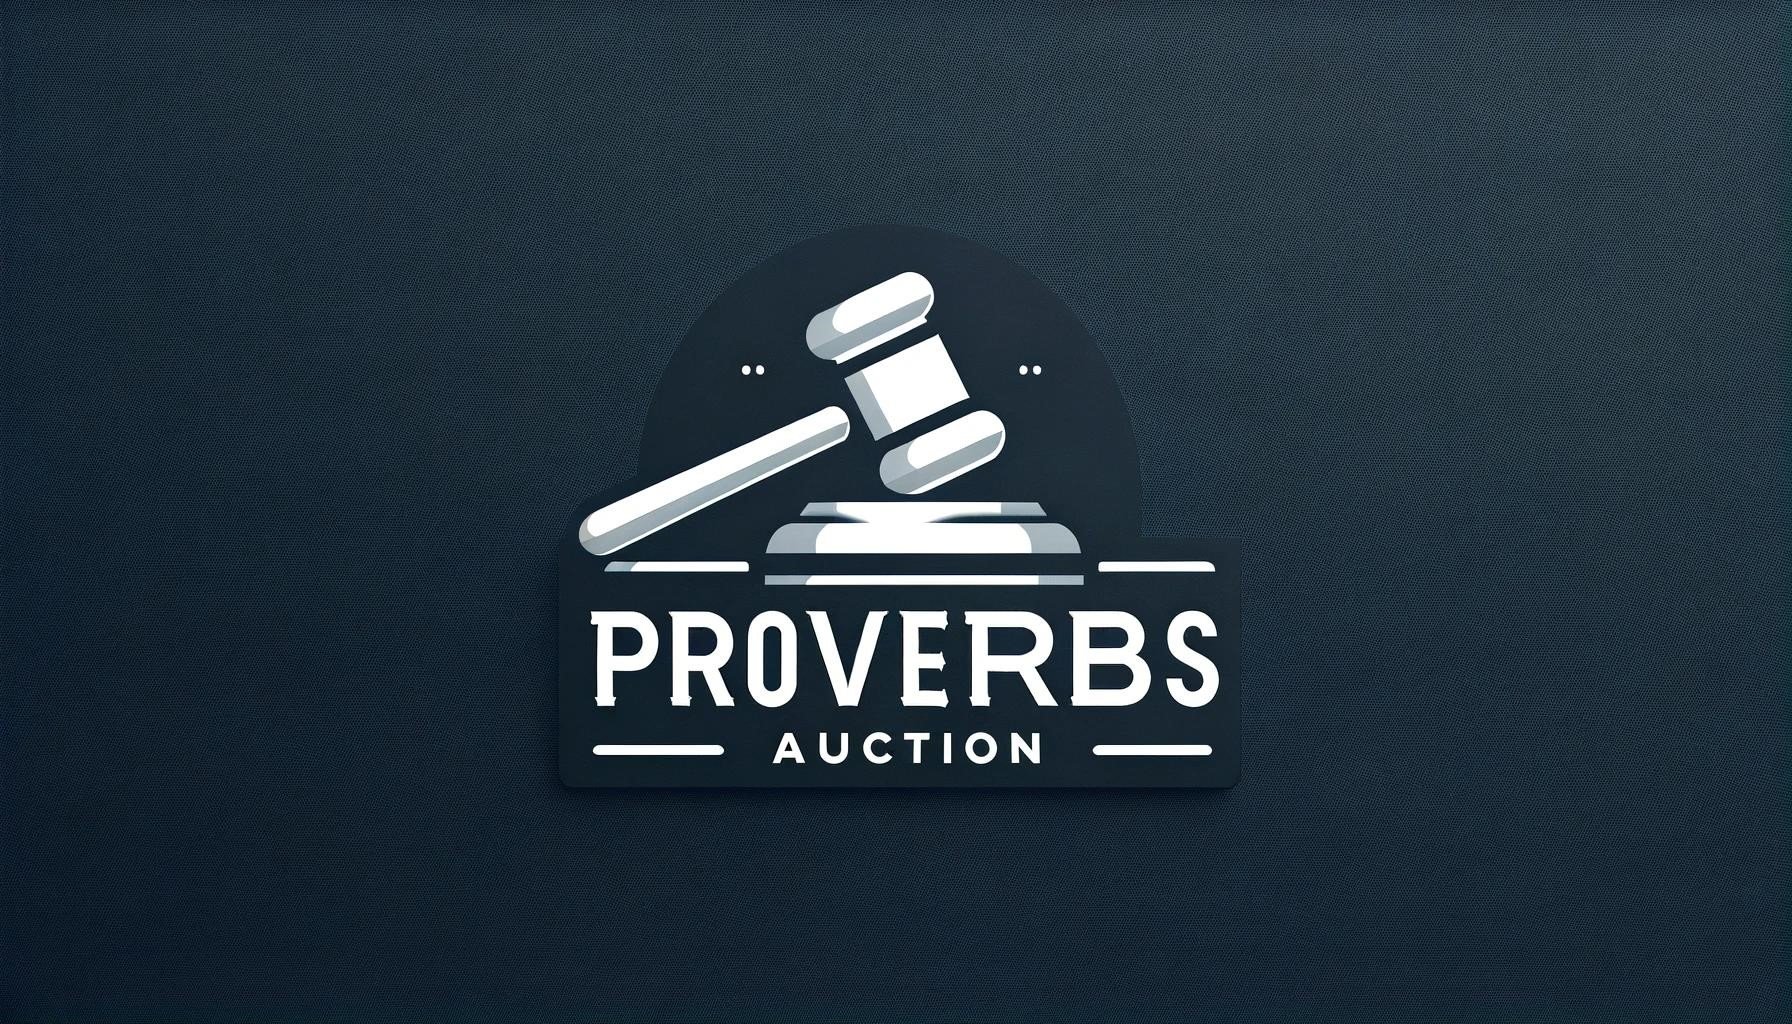 Proverbs Online Auction